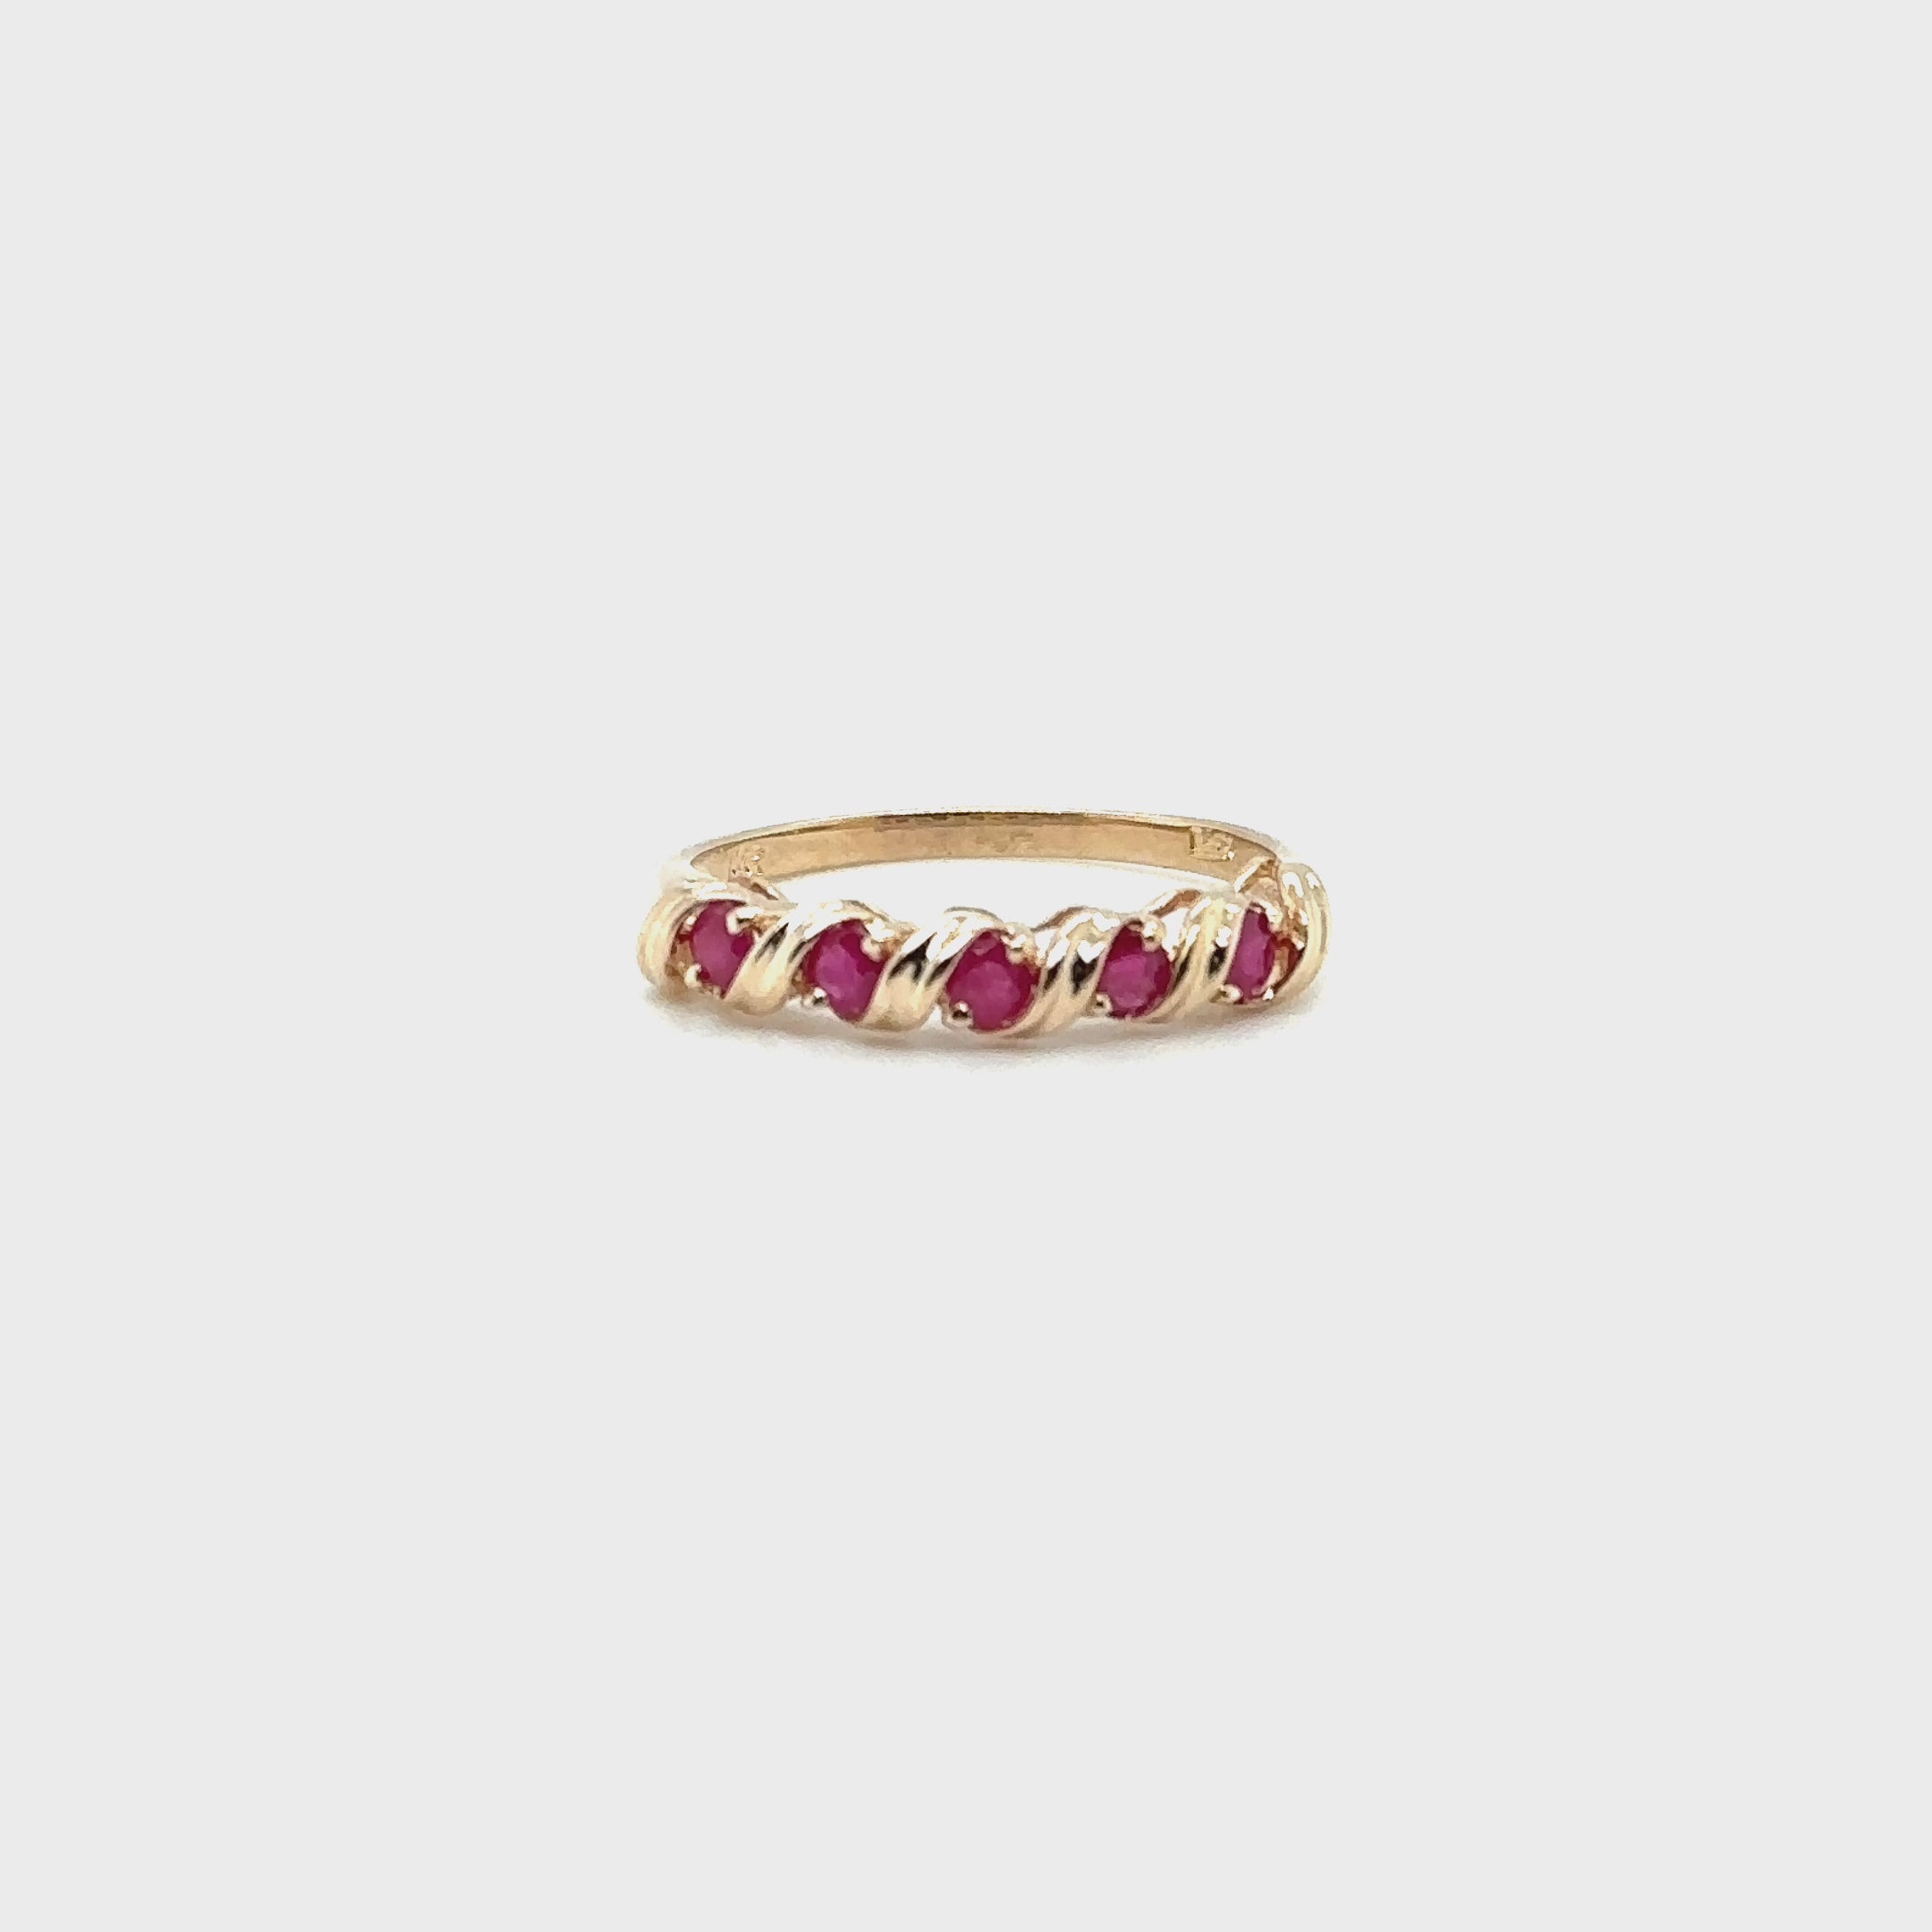 Natural Ruby Ring 14K Solid Gold .35tcw Ruby Band July Birthstone Red Gemstone Ring Engagement Ring Vintage Womens Ring Wedding Band Estate